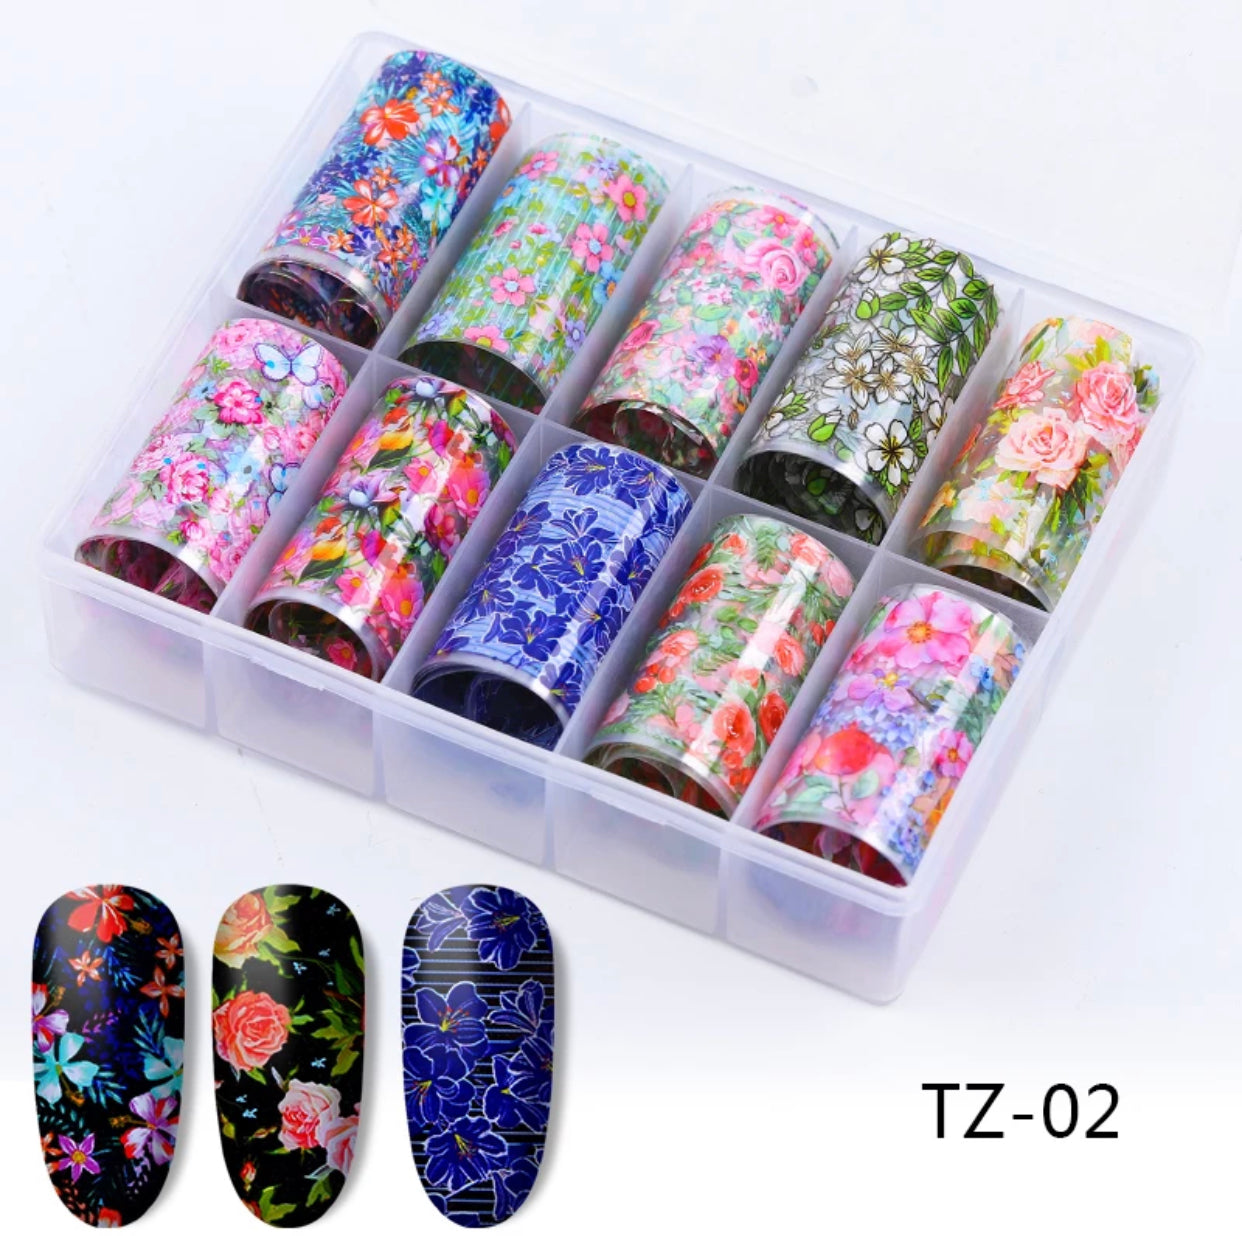 Flowers Mix 12 Different Styles TZ-02 - Premier Nail Supply 